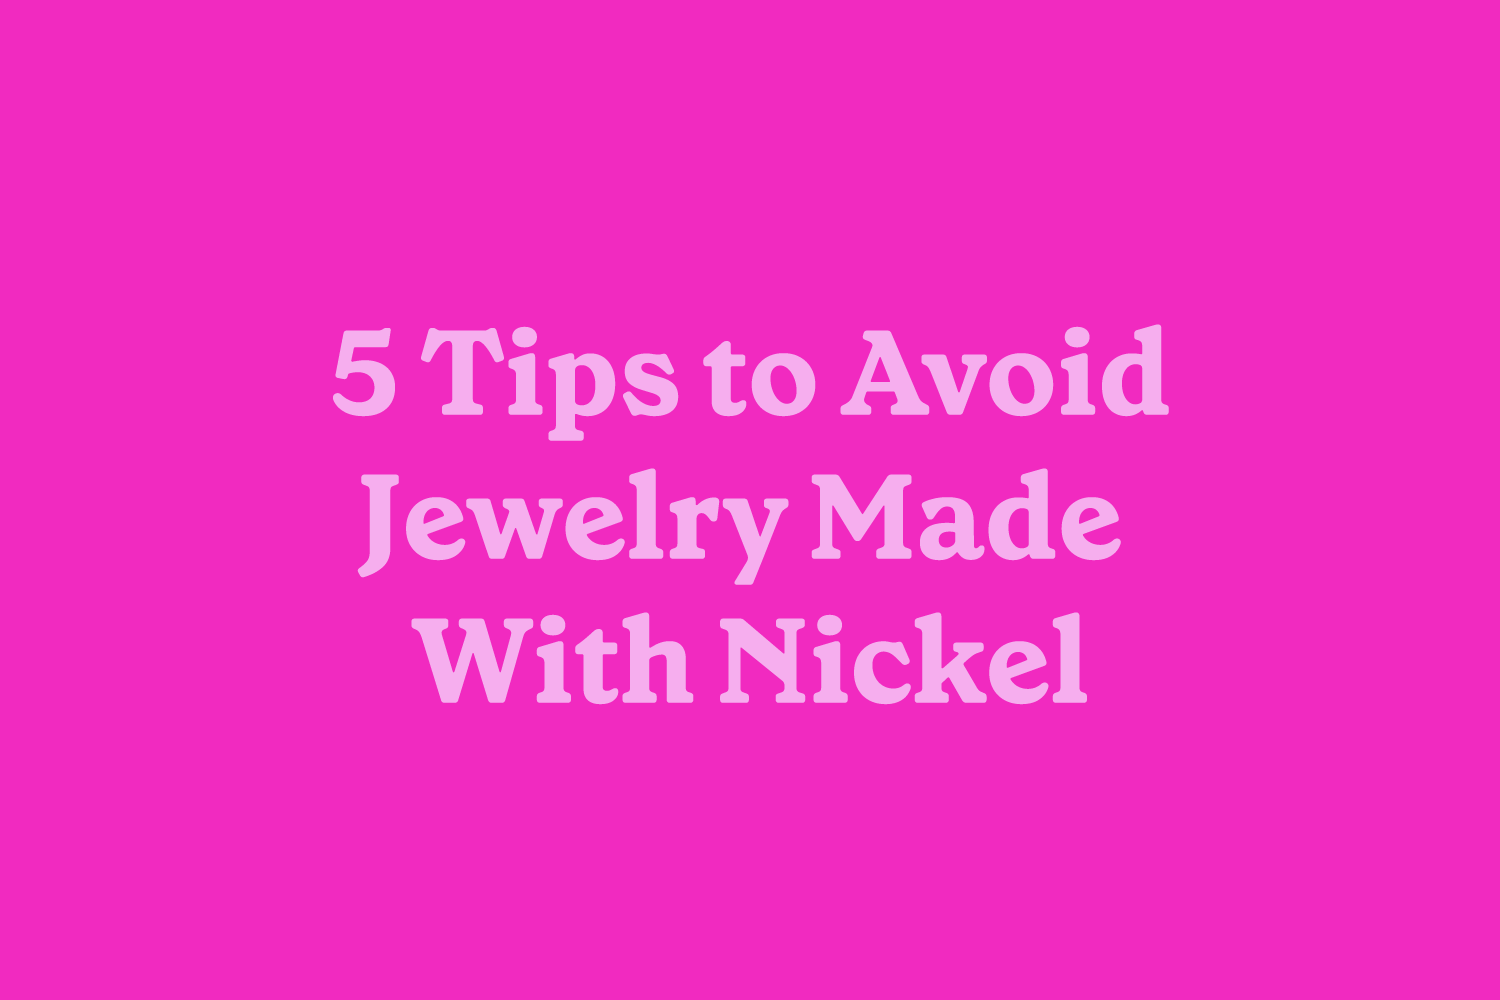 Boma Jewelry 5 Tips to Avoid Nickel in Your Jewelry